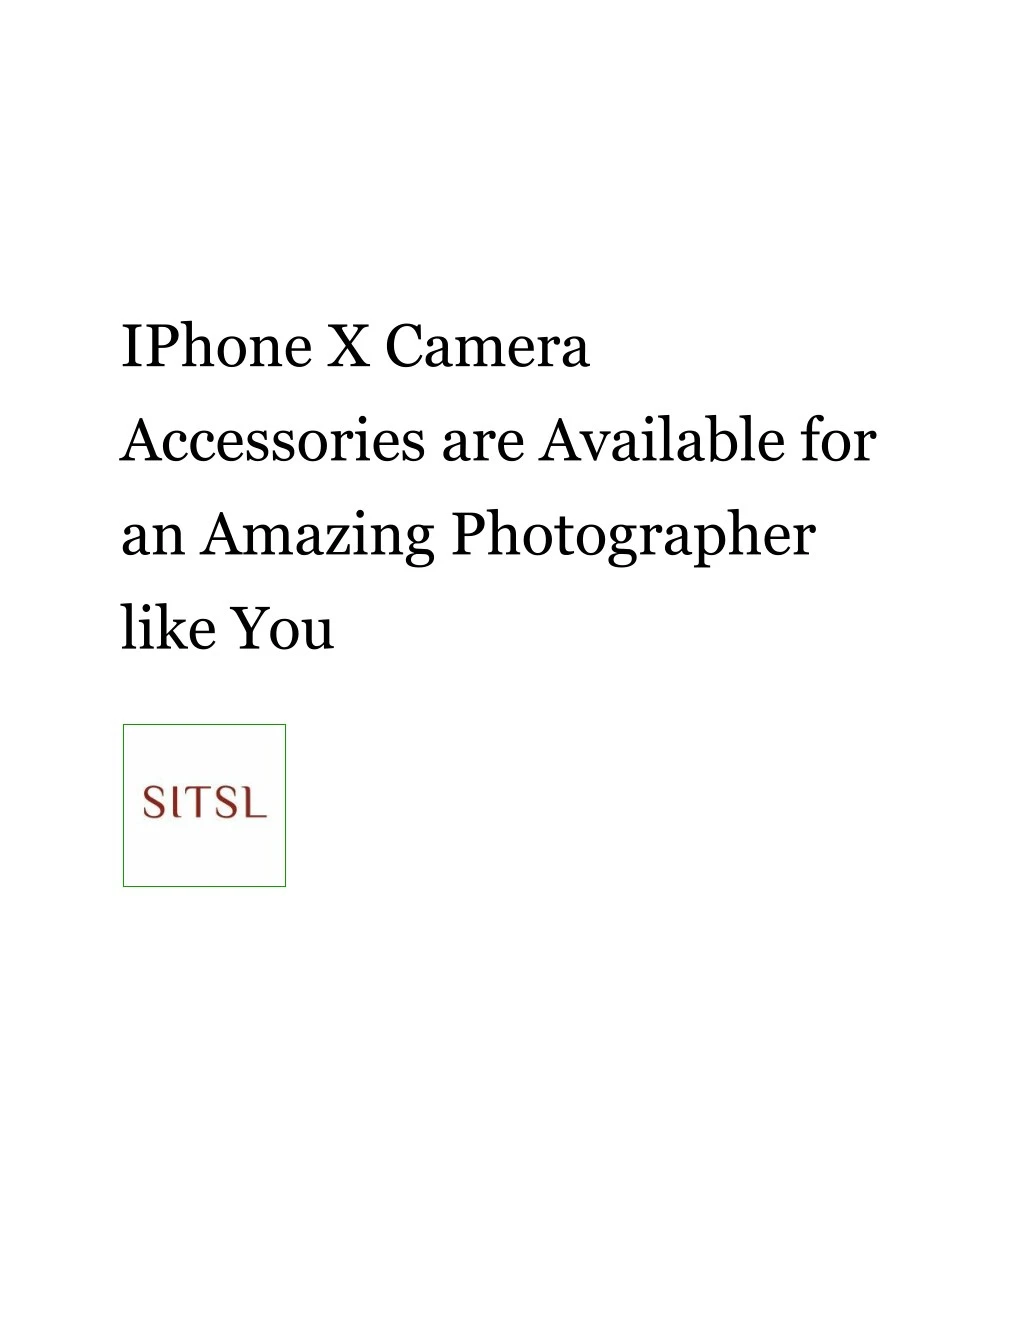 iphone x camera accessories are available